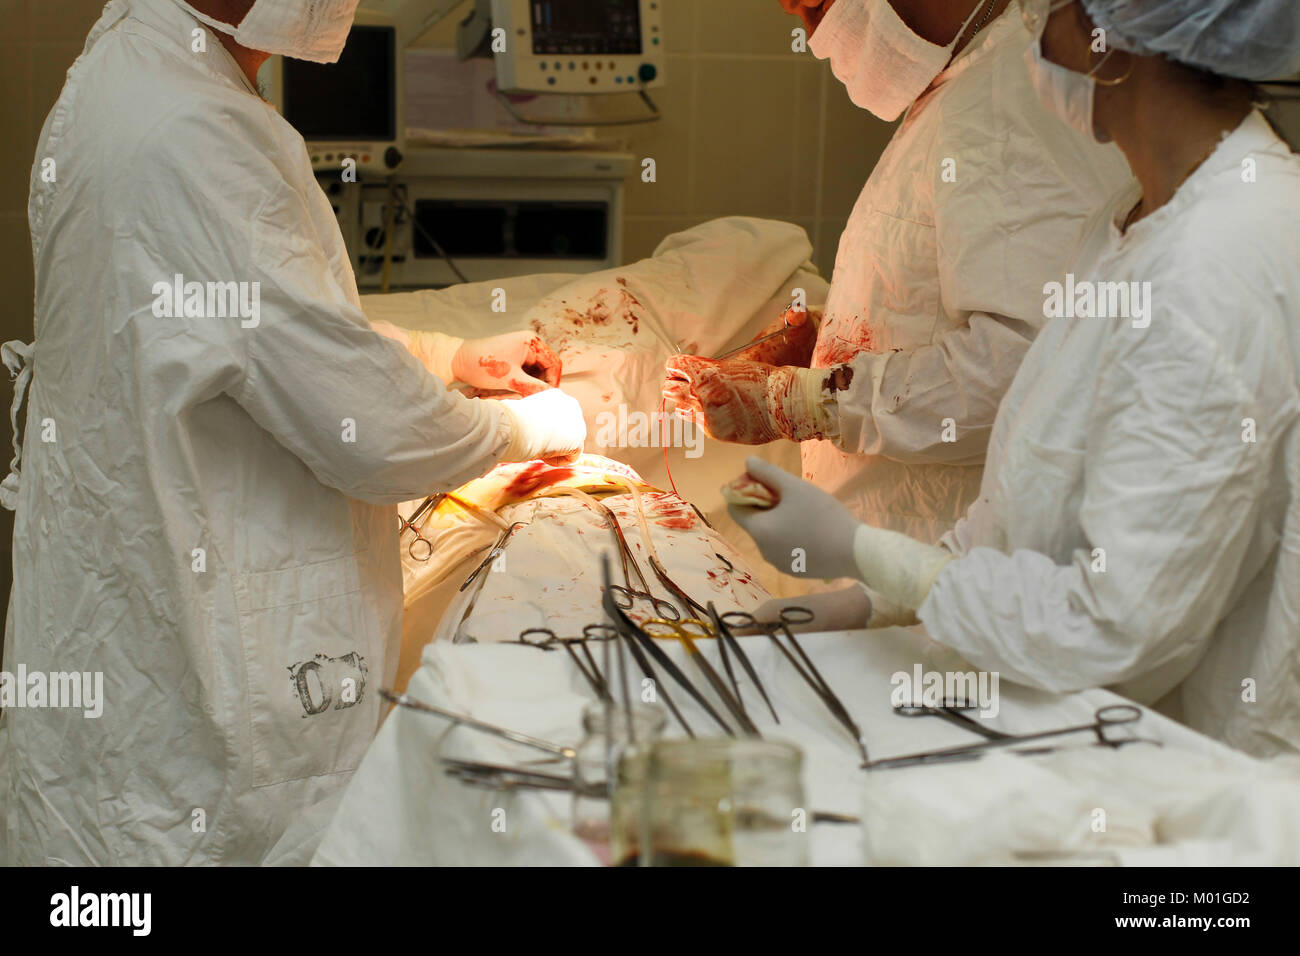 City Gomel, Belarus 01 June 2017,Oncological hospital, surgical department.Doctors in the operating room make an adjustment Stock Photo